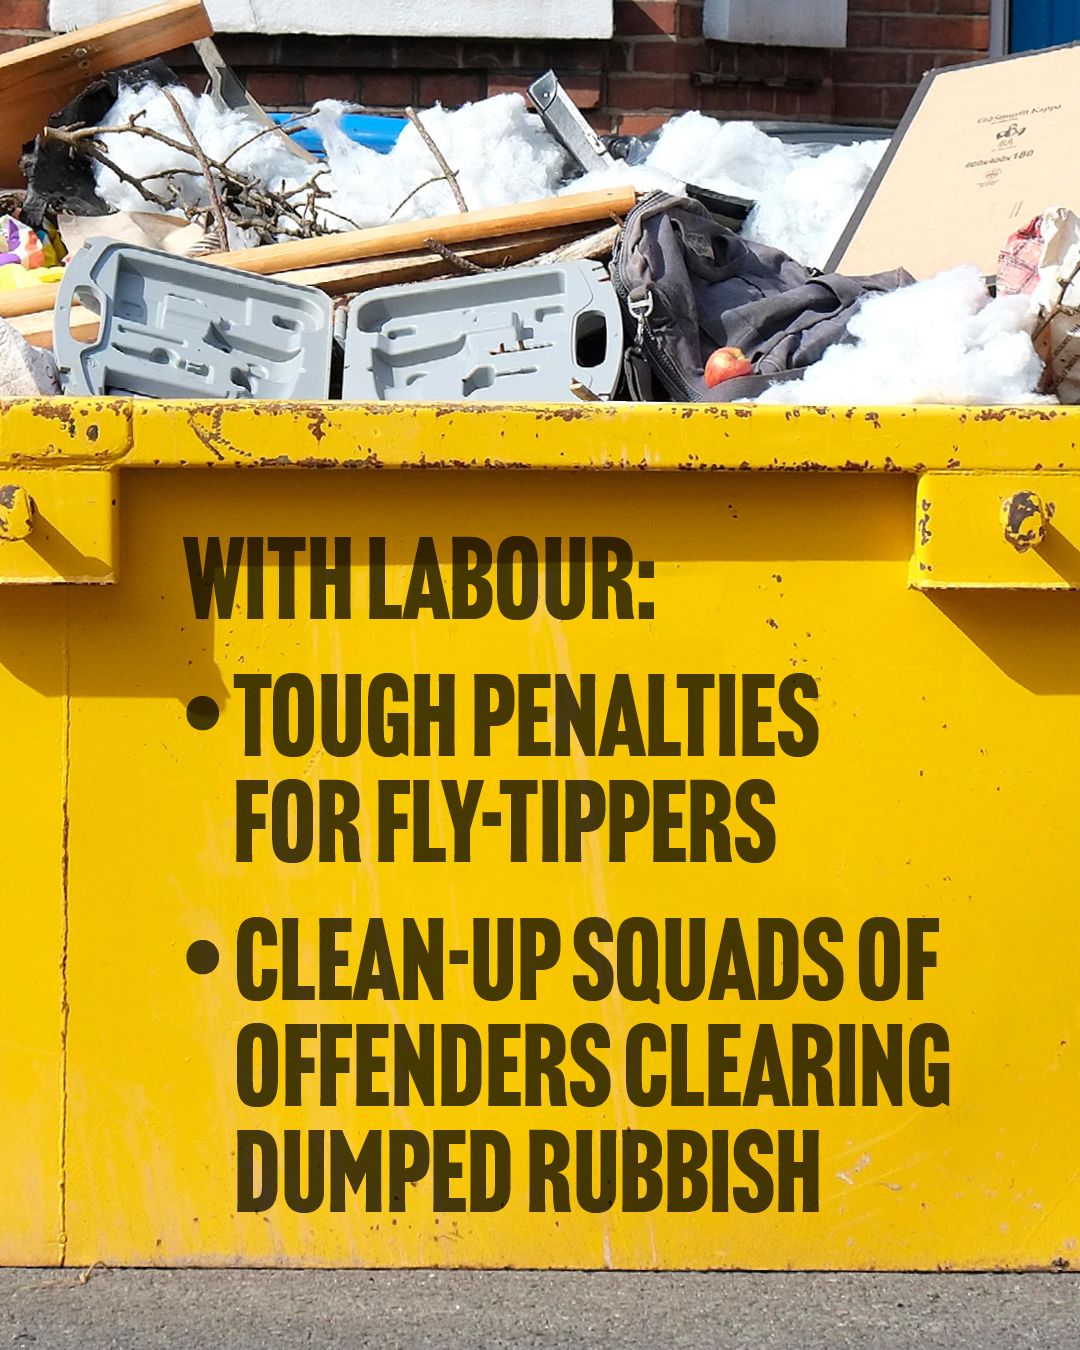 Labour will introduce tough penalties for fly-tippers and those who make the mess will clean it up